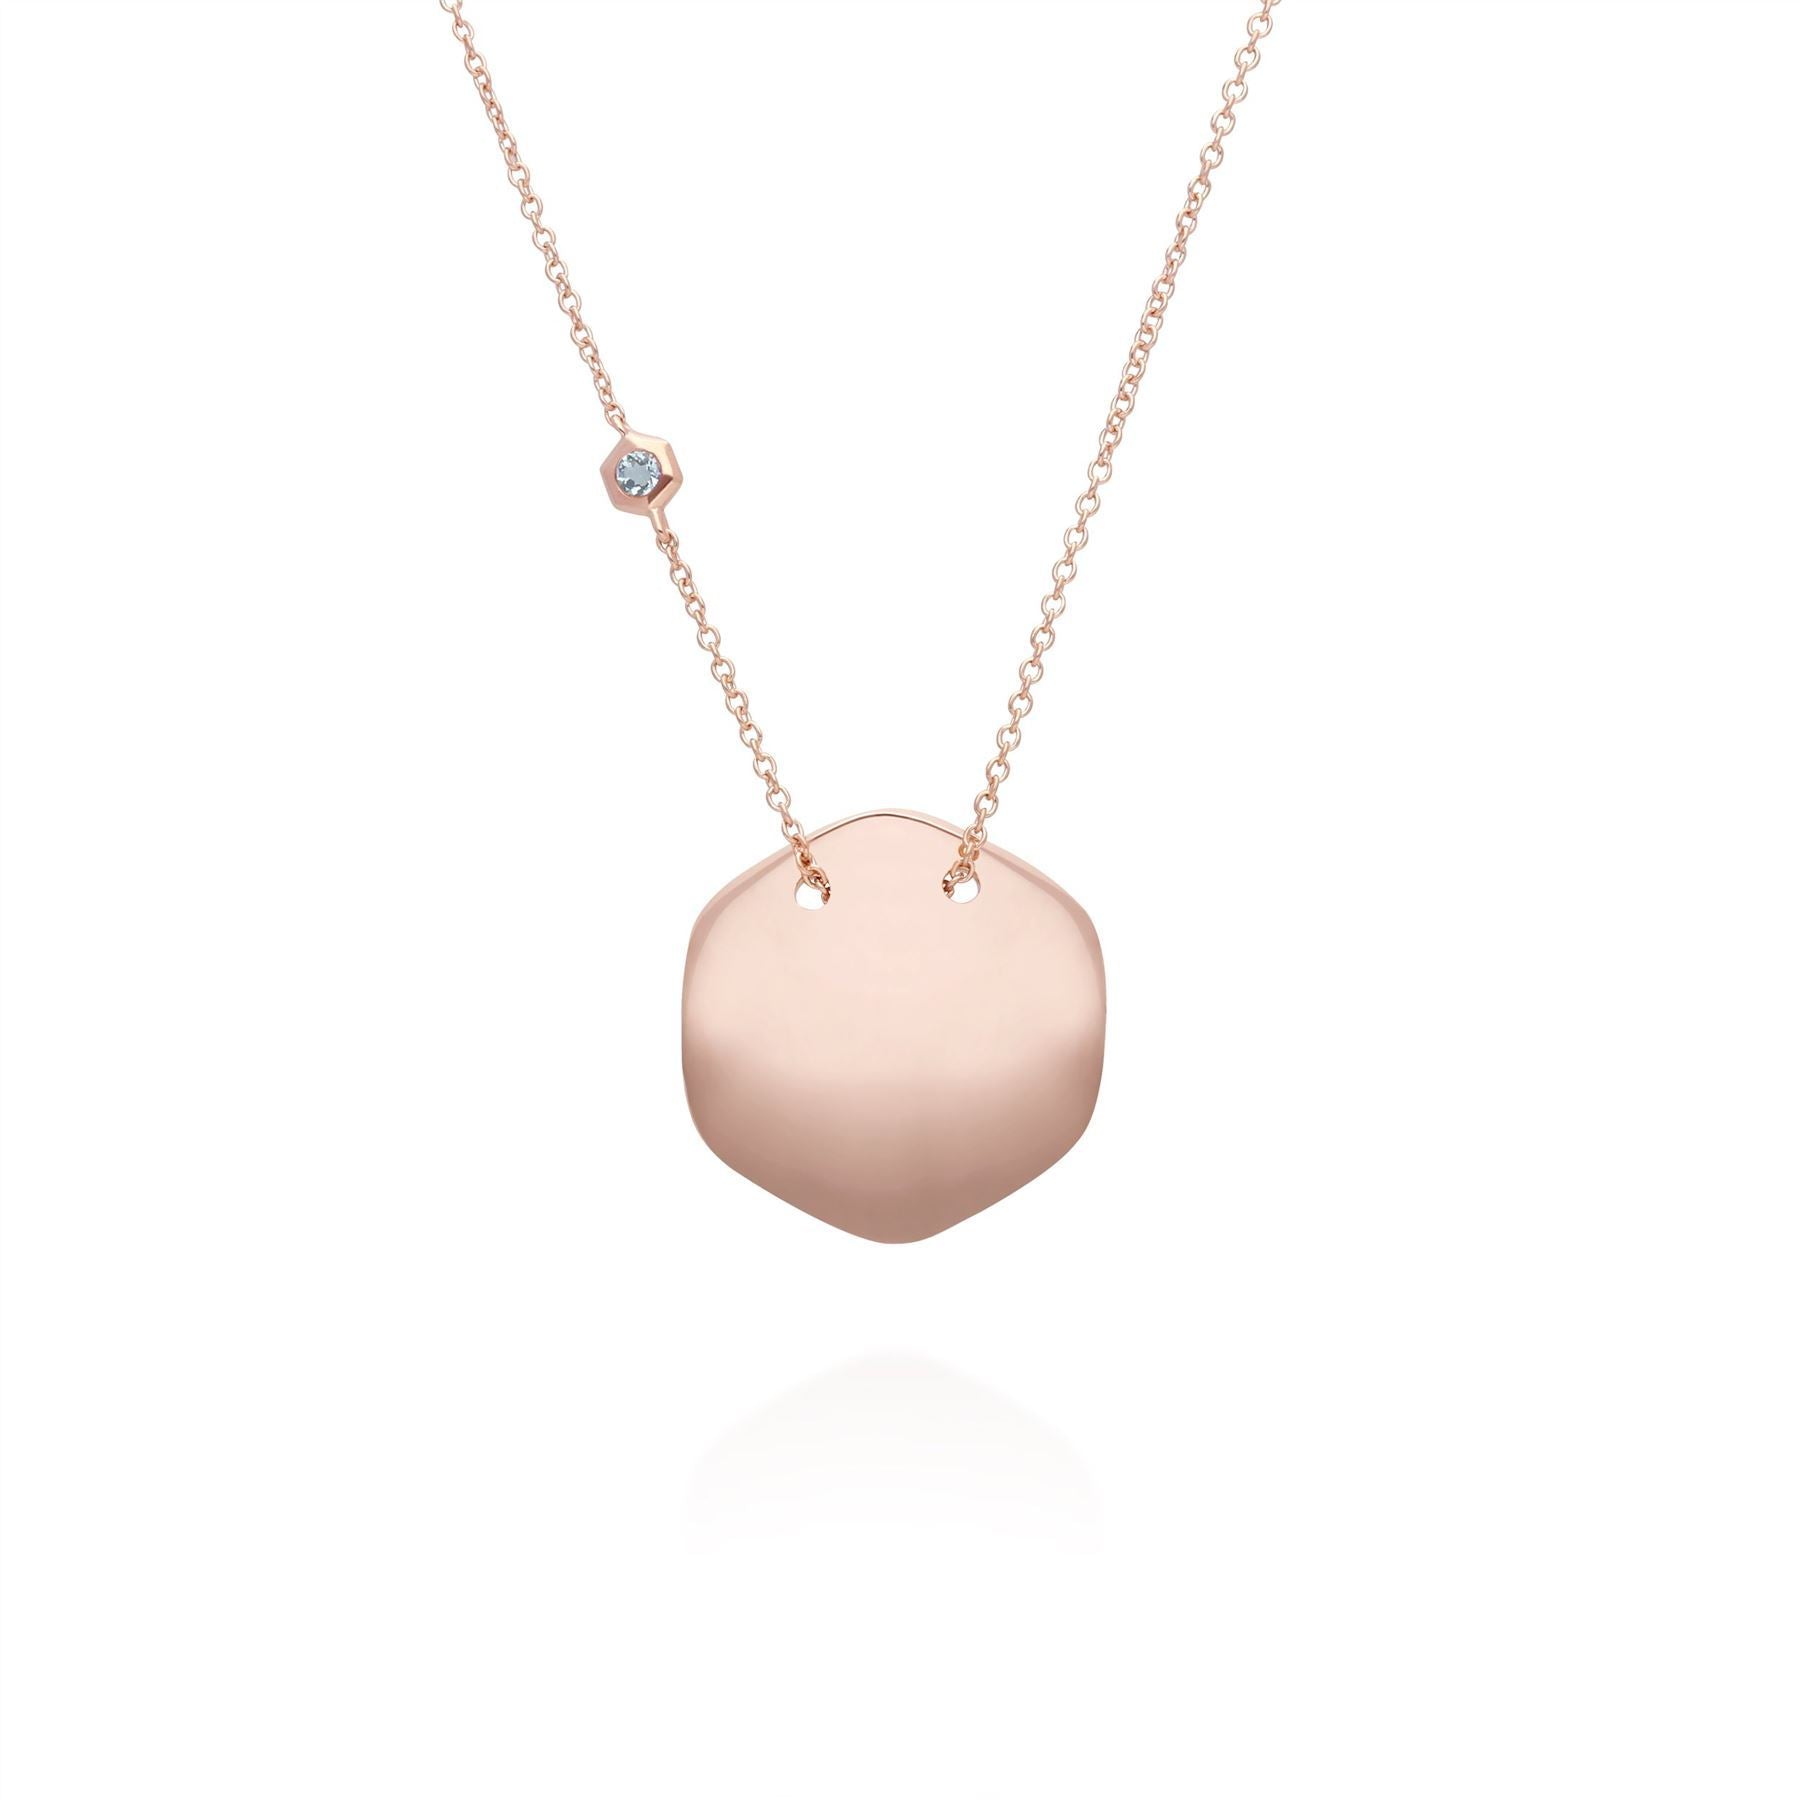 Aquamarine Engravable Necklace in Rose Gold Plated Sterling Silver